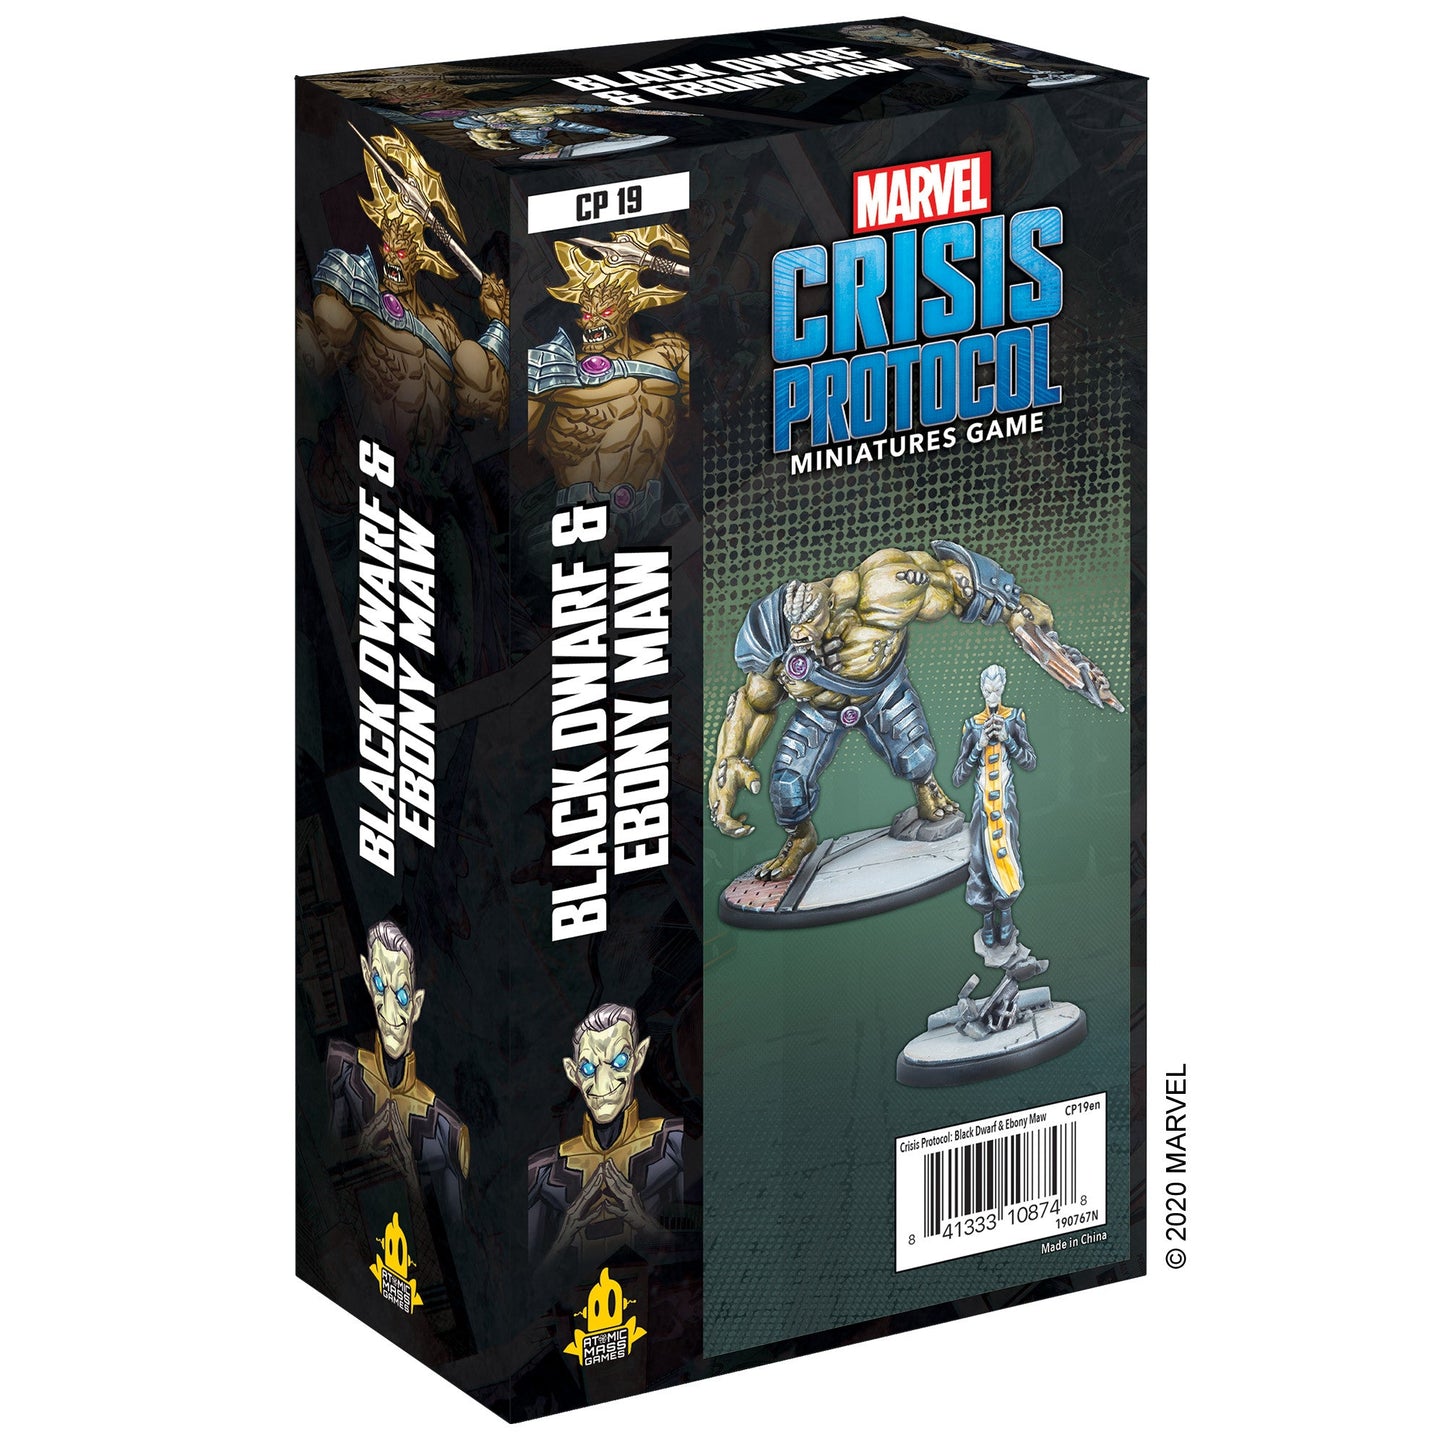 Marvel Crisis Protocol Black Dwarf & Ebony Maw from Atomic Mass Games at The Compleat Strategist